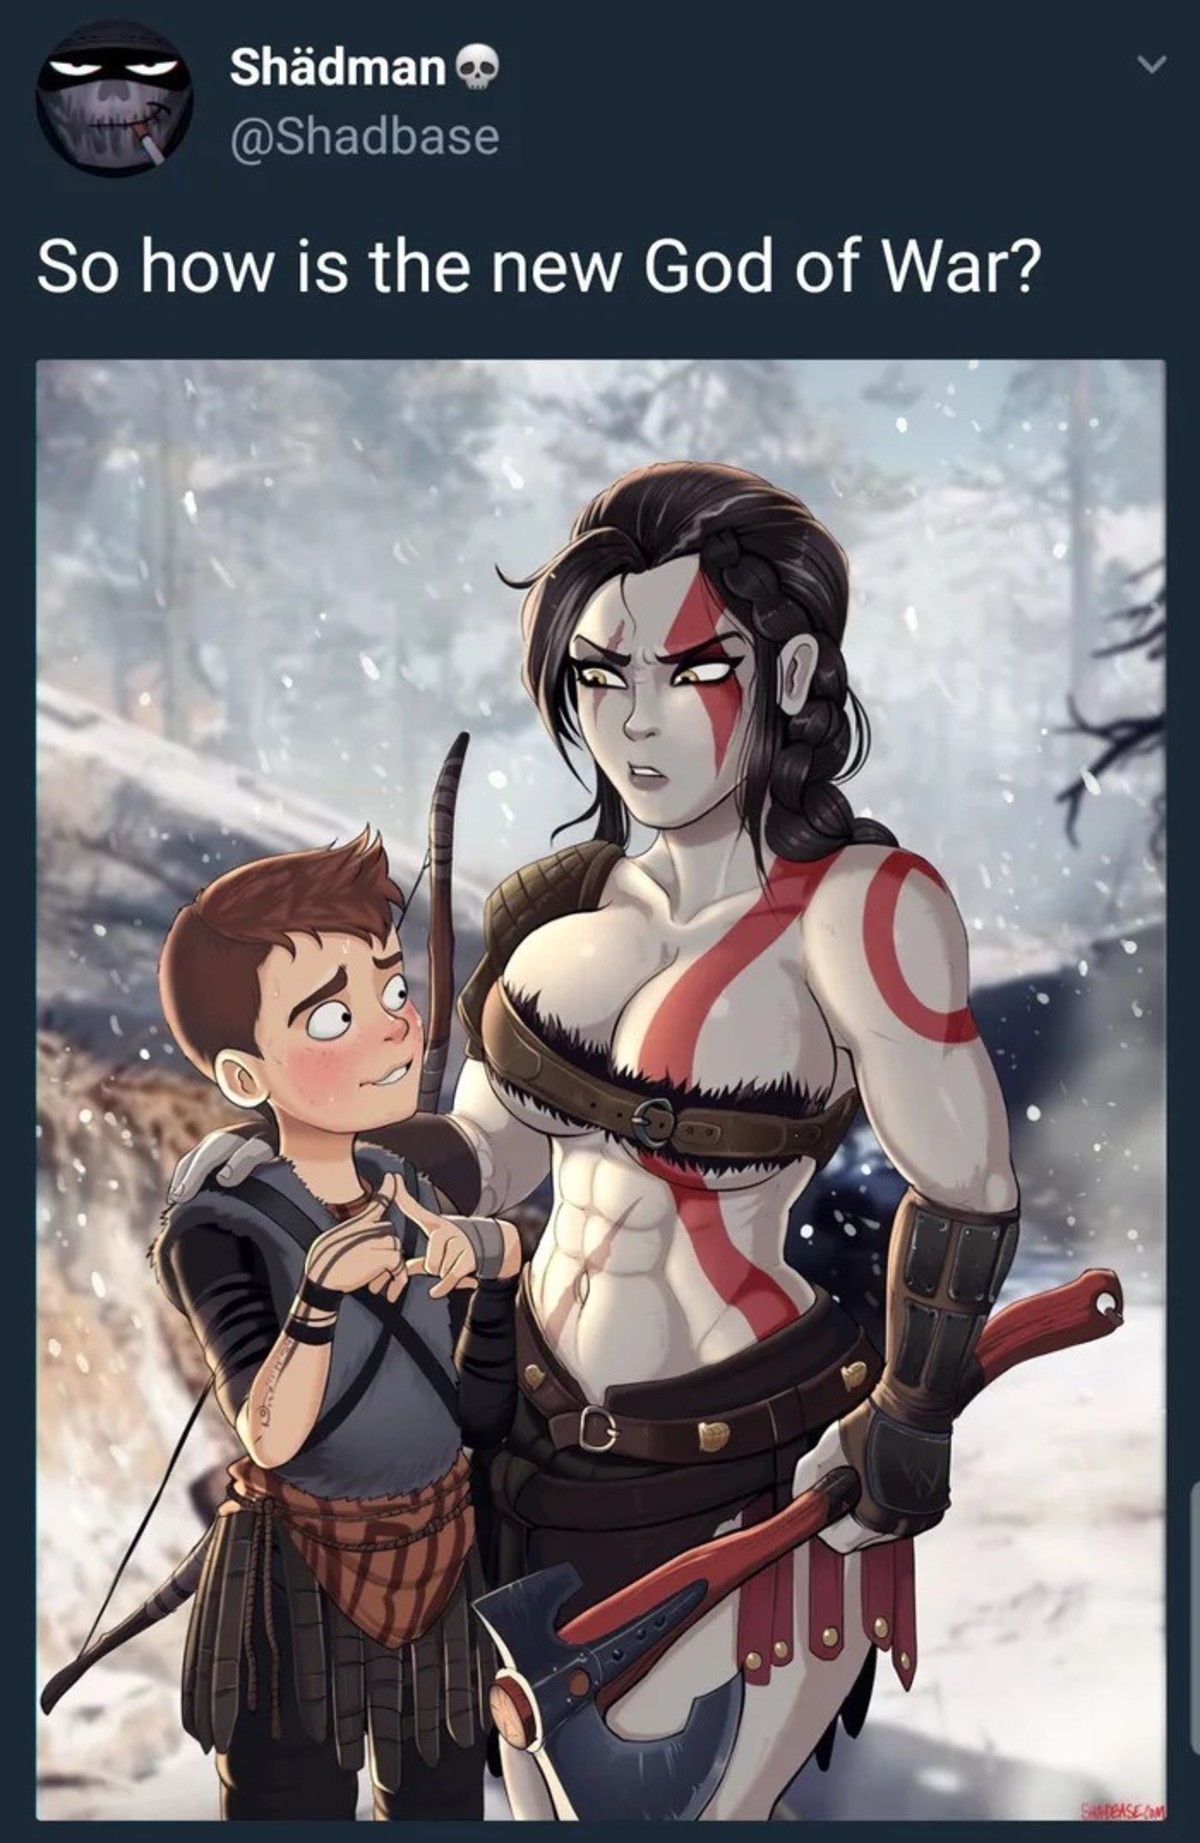 At least he turned Kratos into a woman instead of Atreus. 